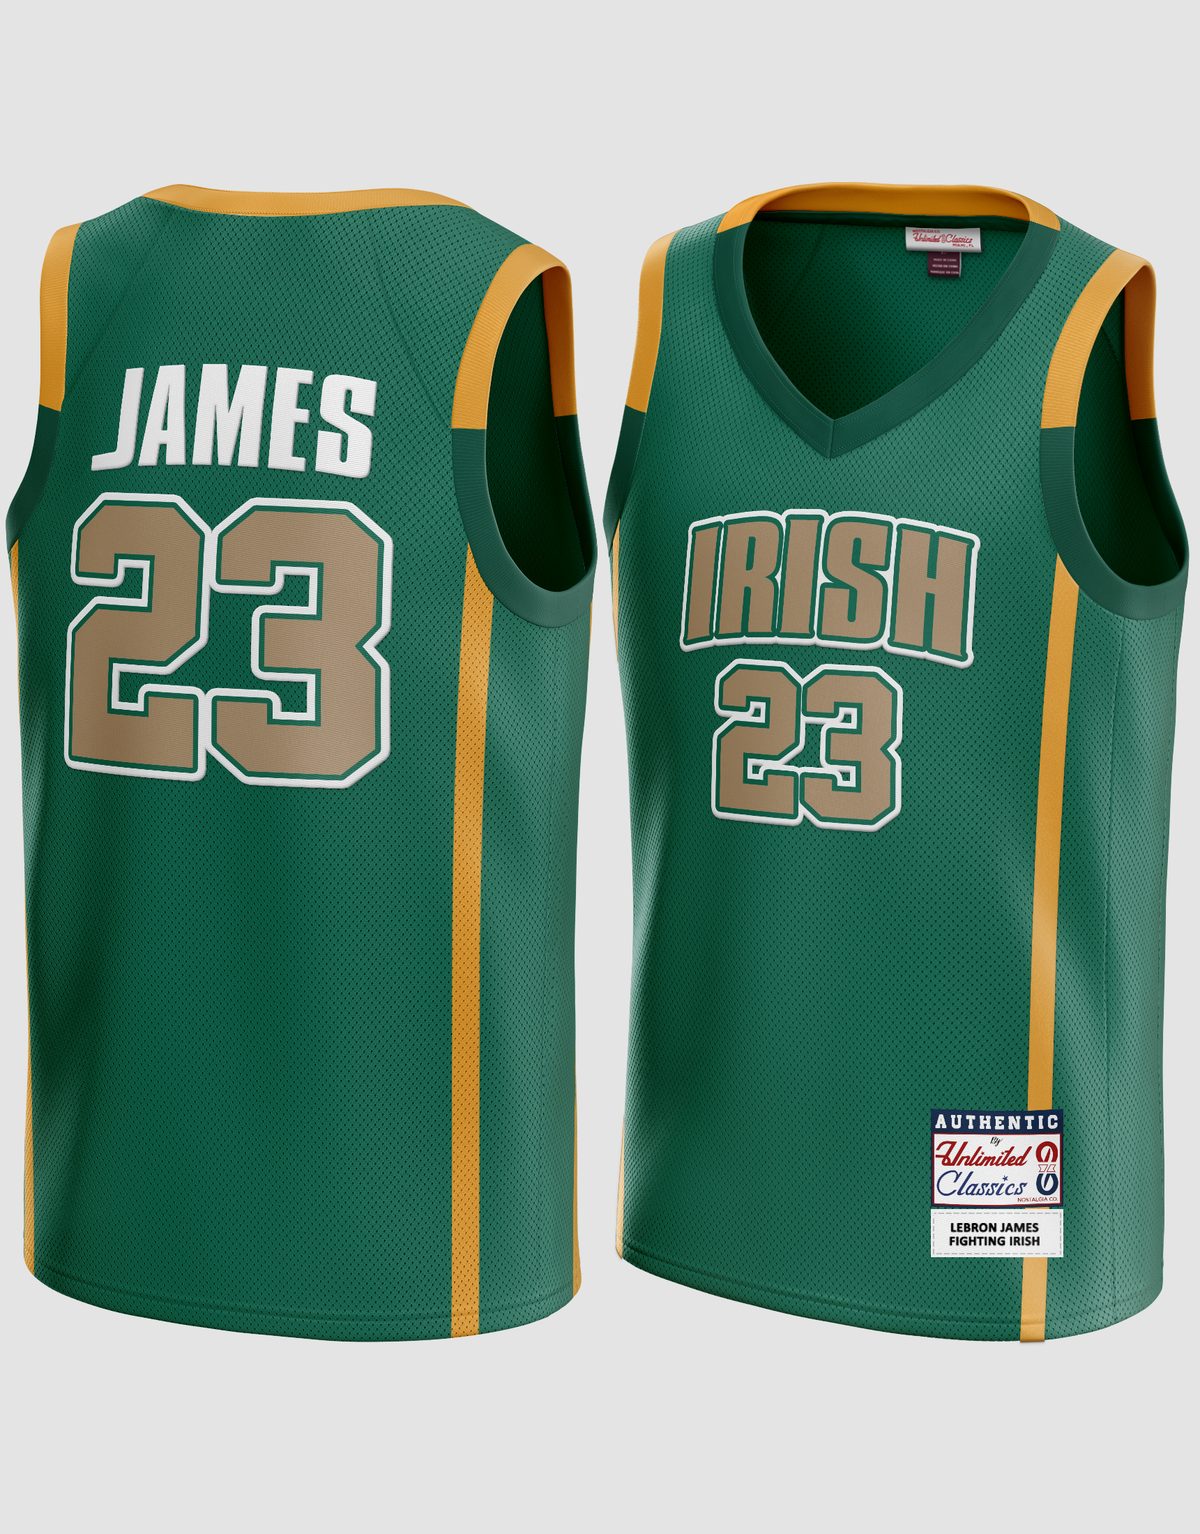 LeBron James Jersey Number: What Will He Choose After Giving up 23?